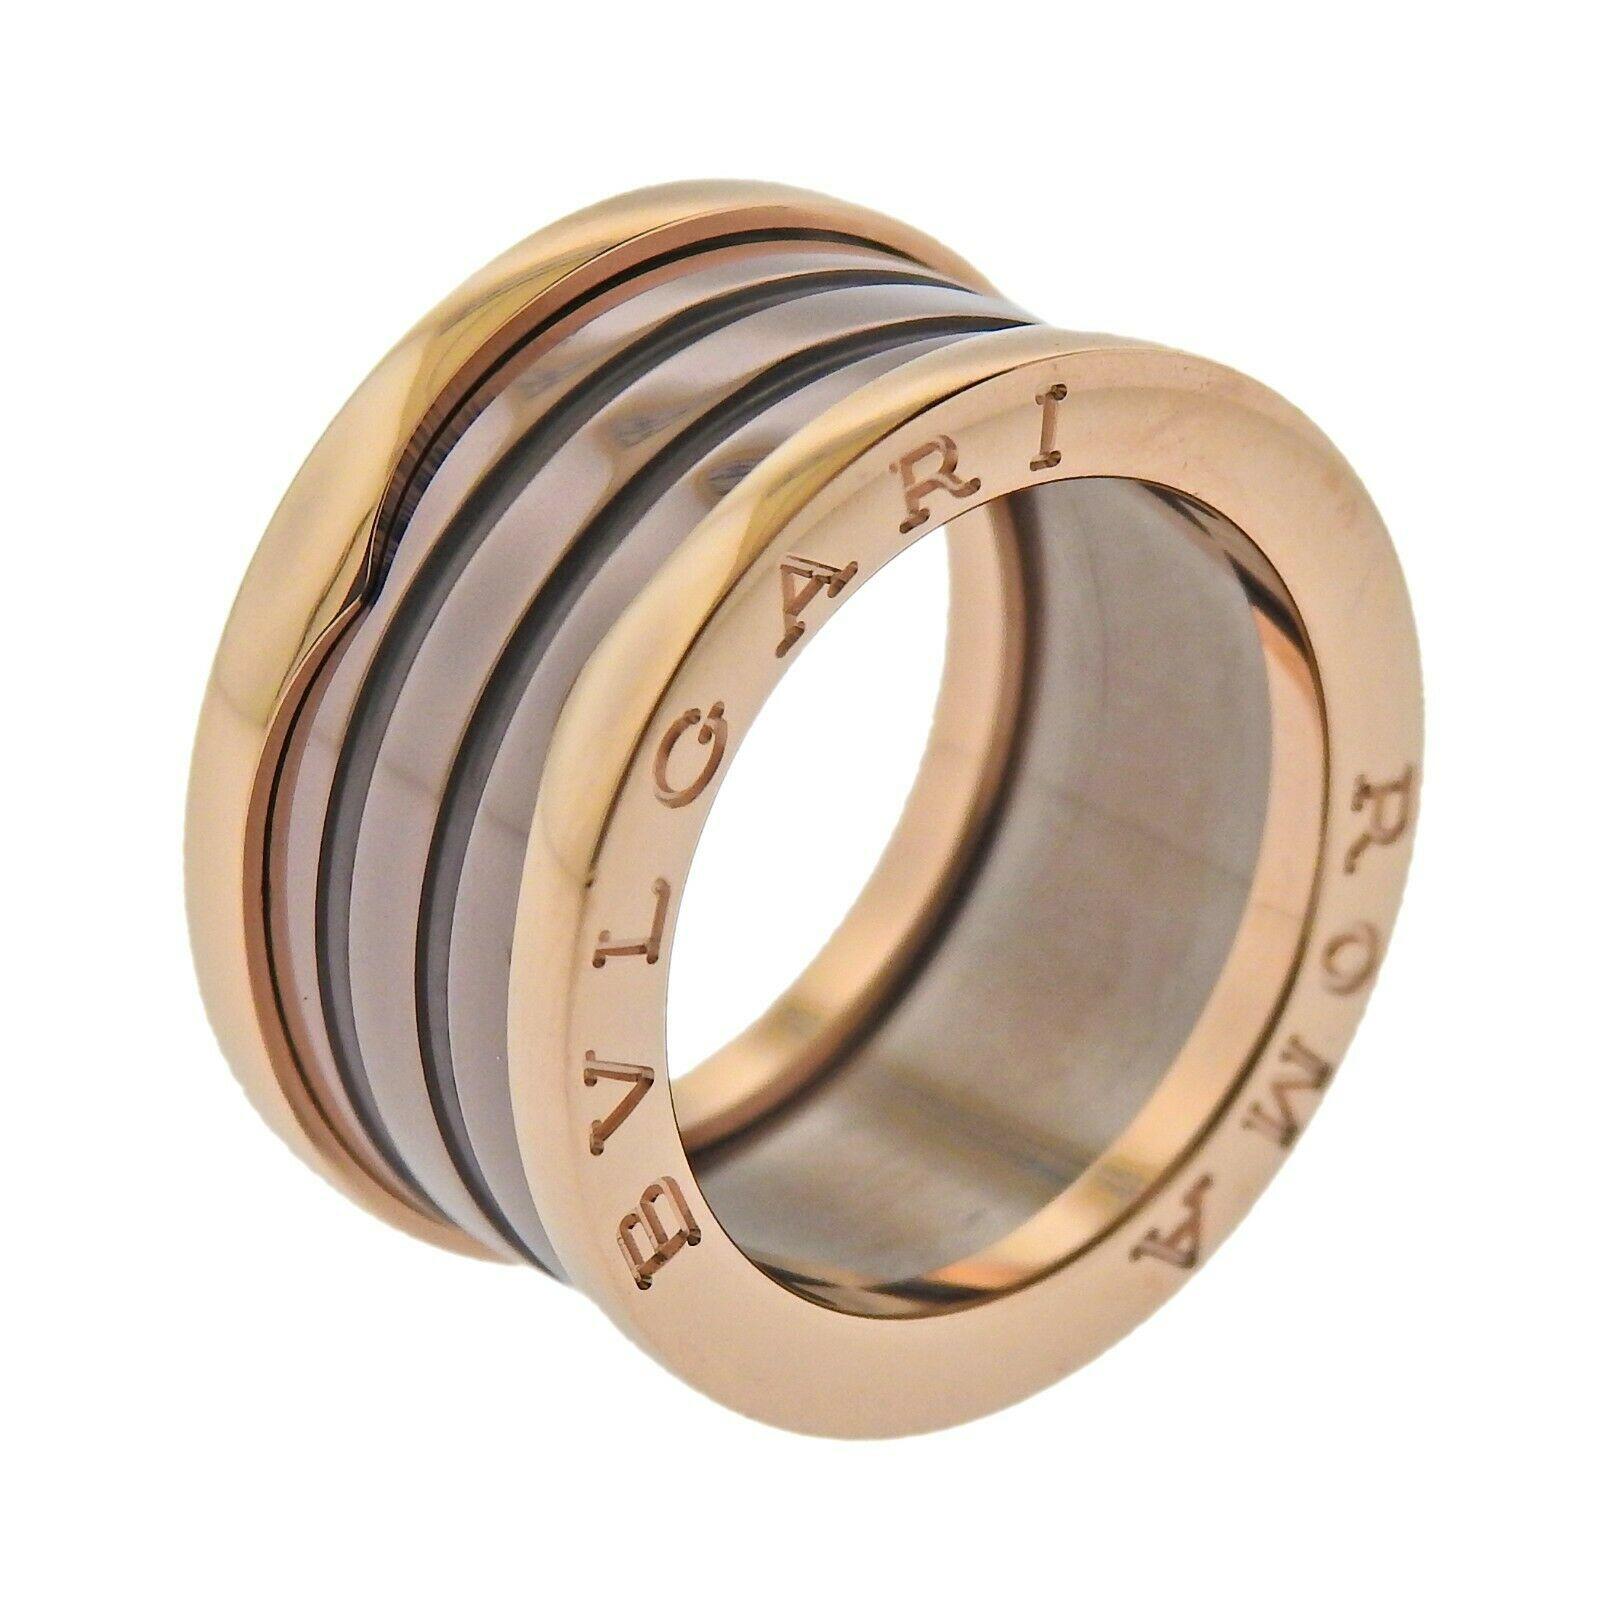 New 18k rose gold and bronze ceramic B.Zero1 Roma band ring by Bvlgari, in size 55.  Retail $1700. With box/papers. Ring size - 7, ring is 12mm wide (Euro size 55)  Weight - 10.5 grams. Marked: Bvlgari, made in Italy, 750, 55.